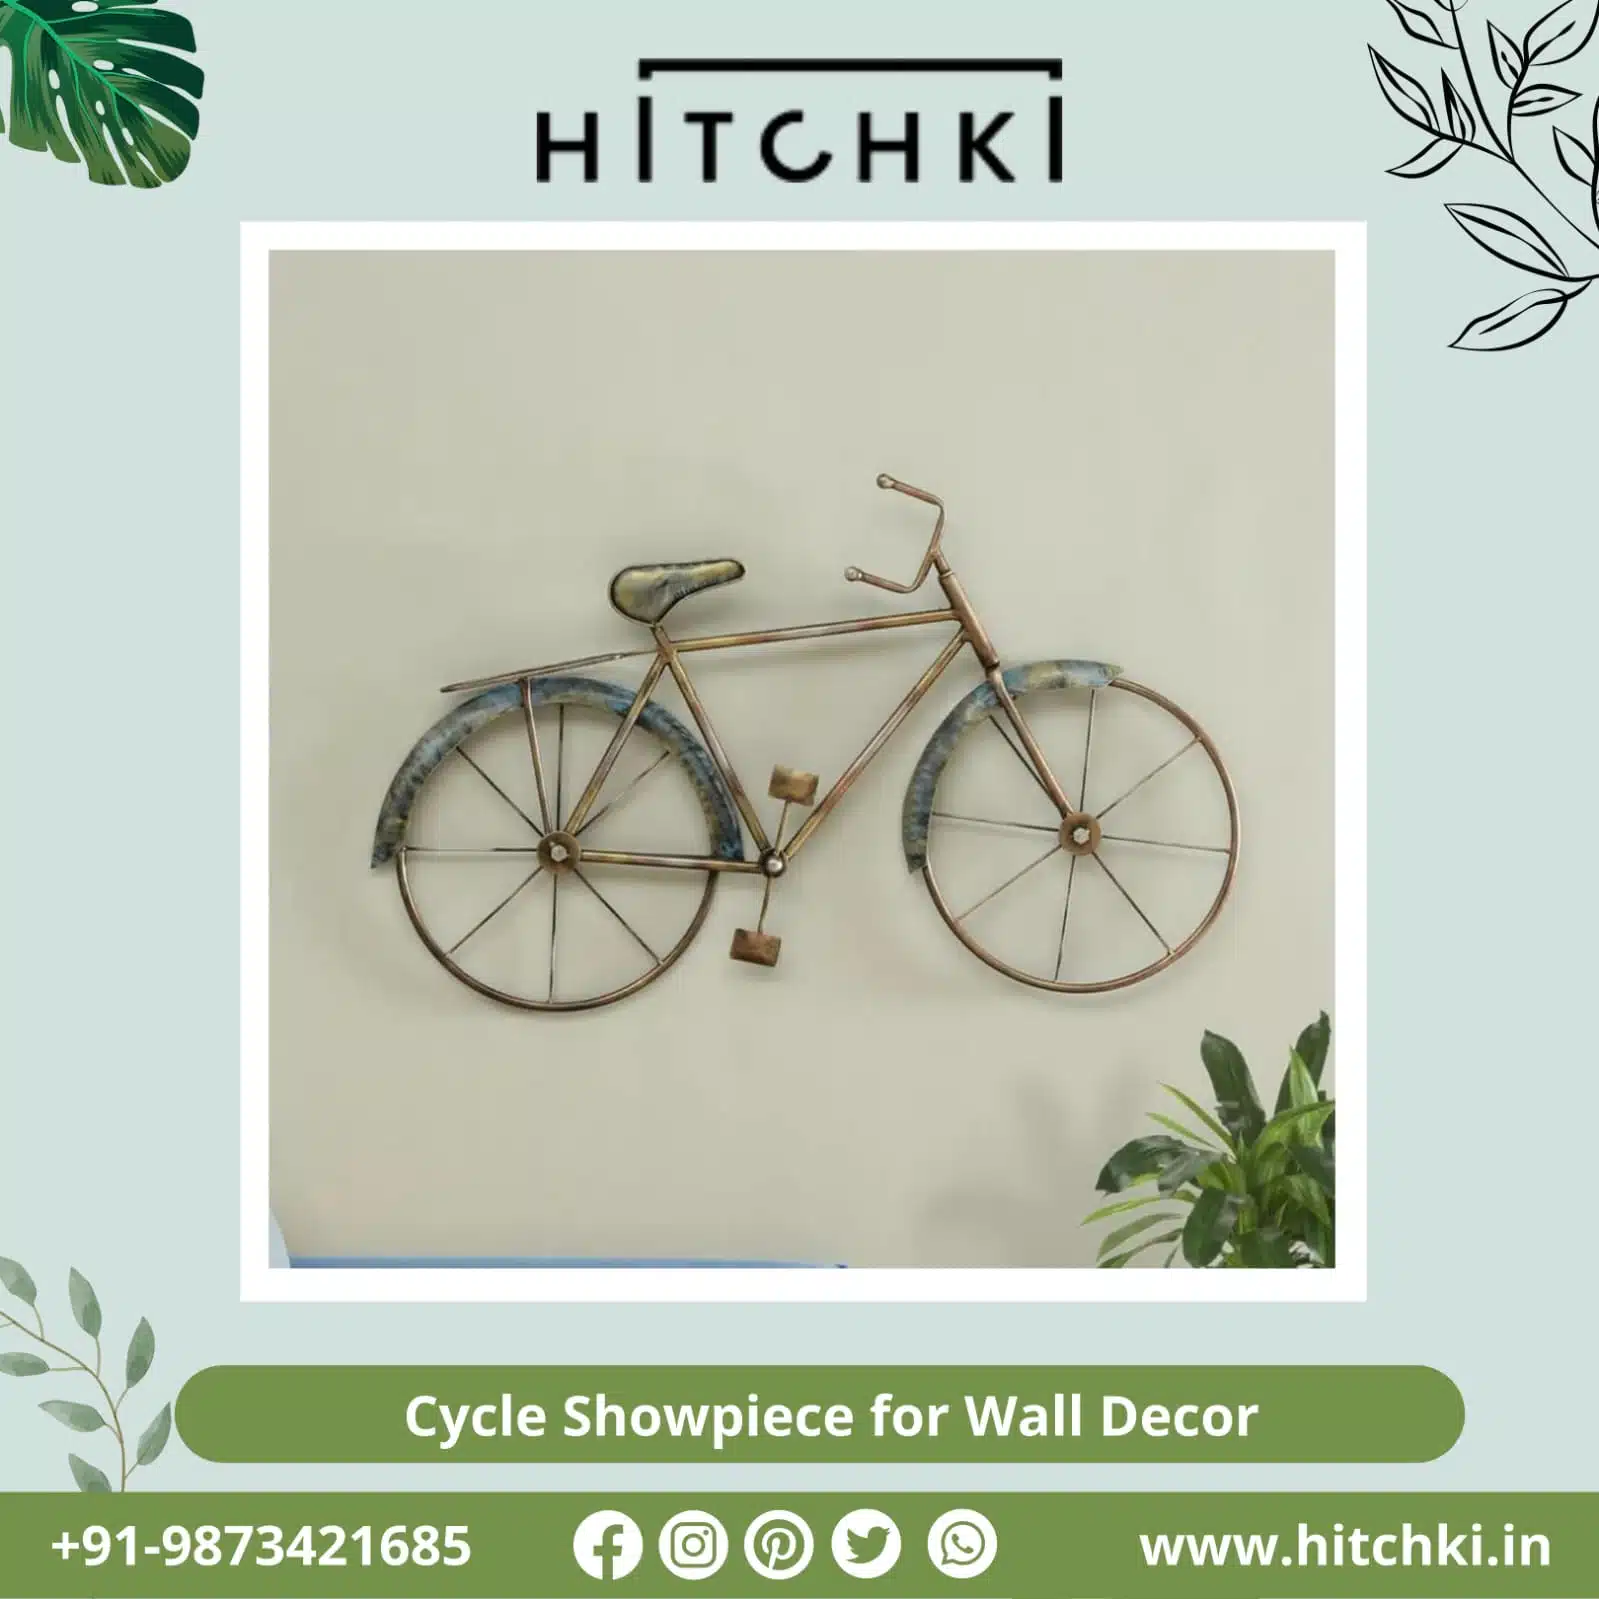 Try Latest Cycle Showpiece As Your Wall Decor 1